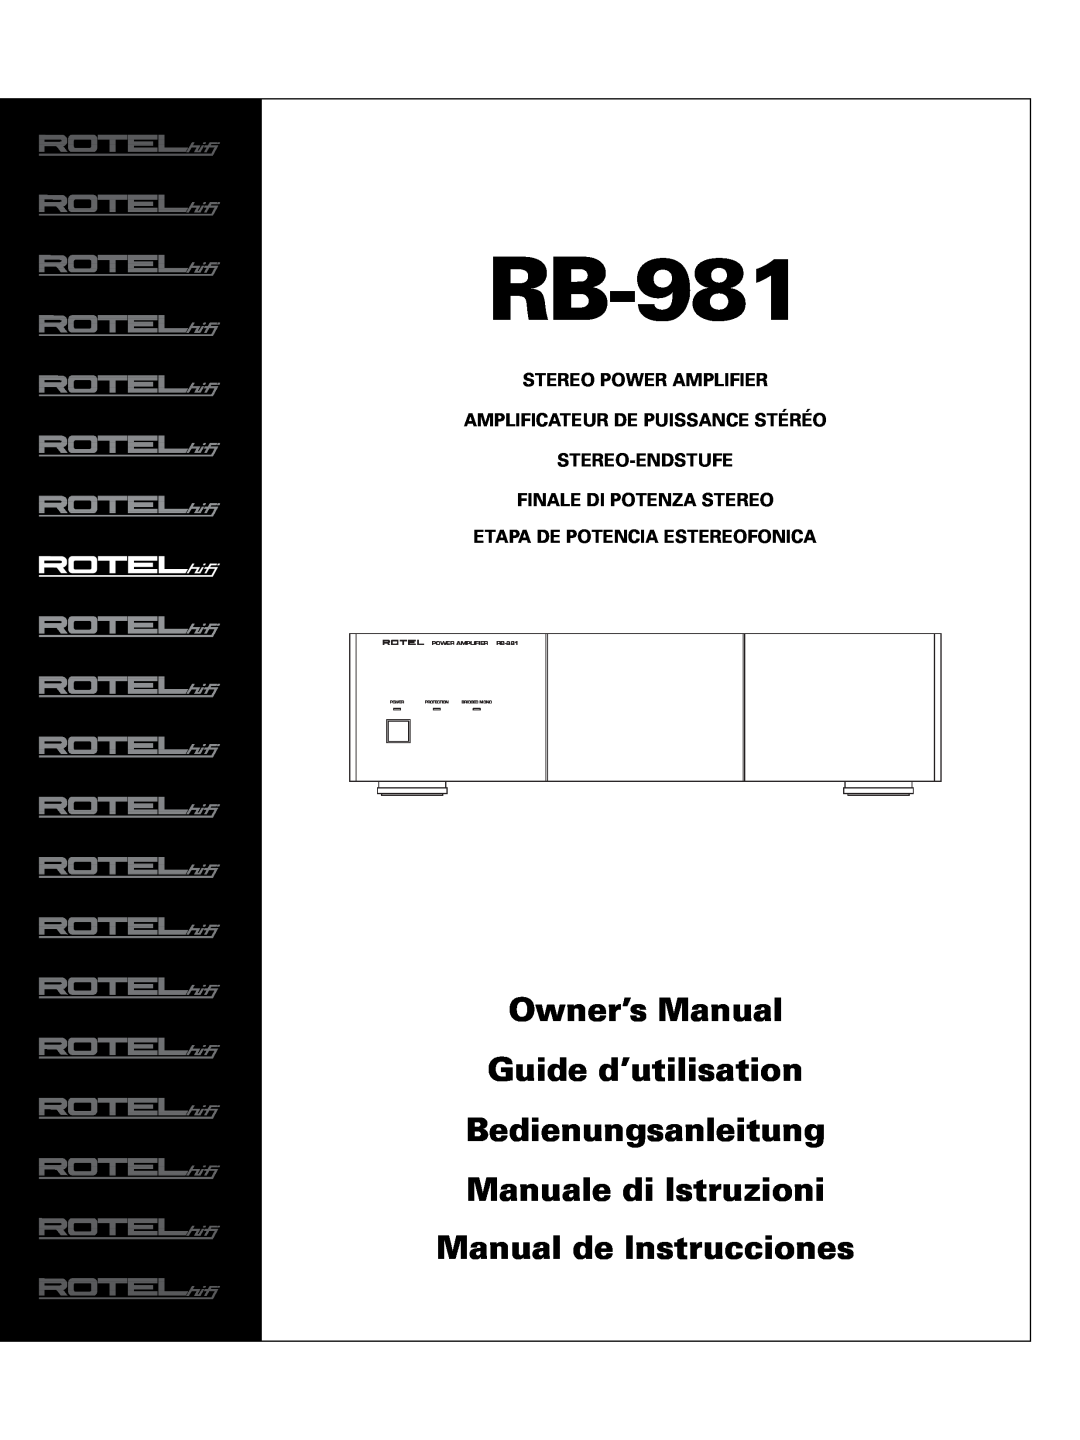 Rotel RB-981 owner manual Stereo Power Amplifier, Amplificateur De Puissance Stéréo Stereo-Endstufe, Protection 